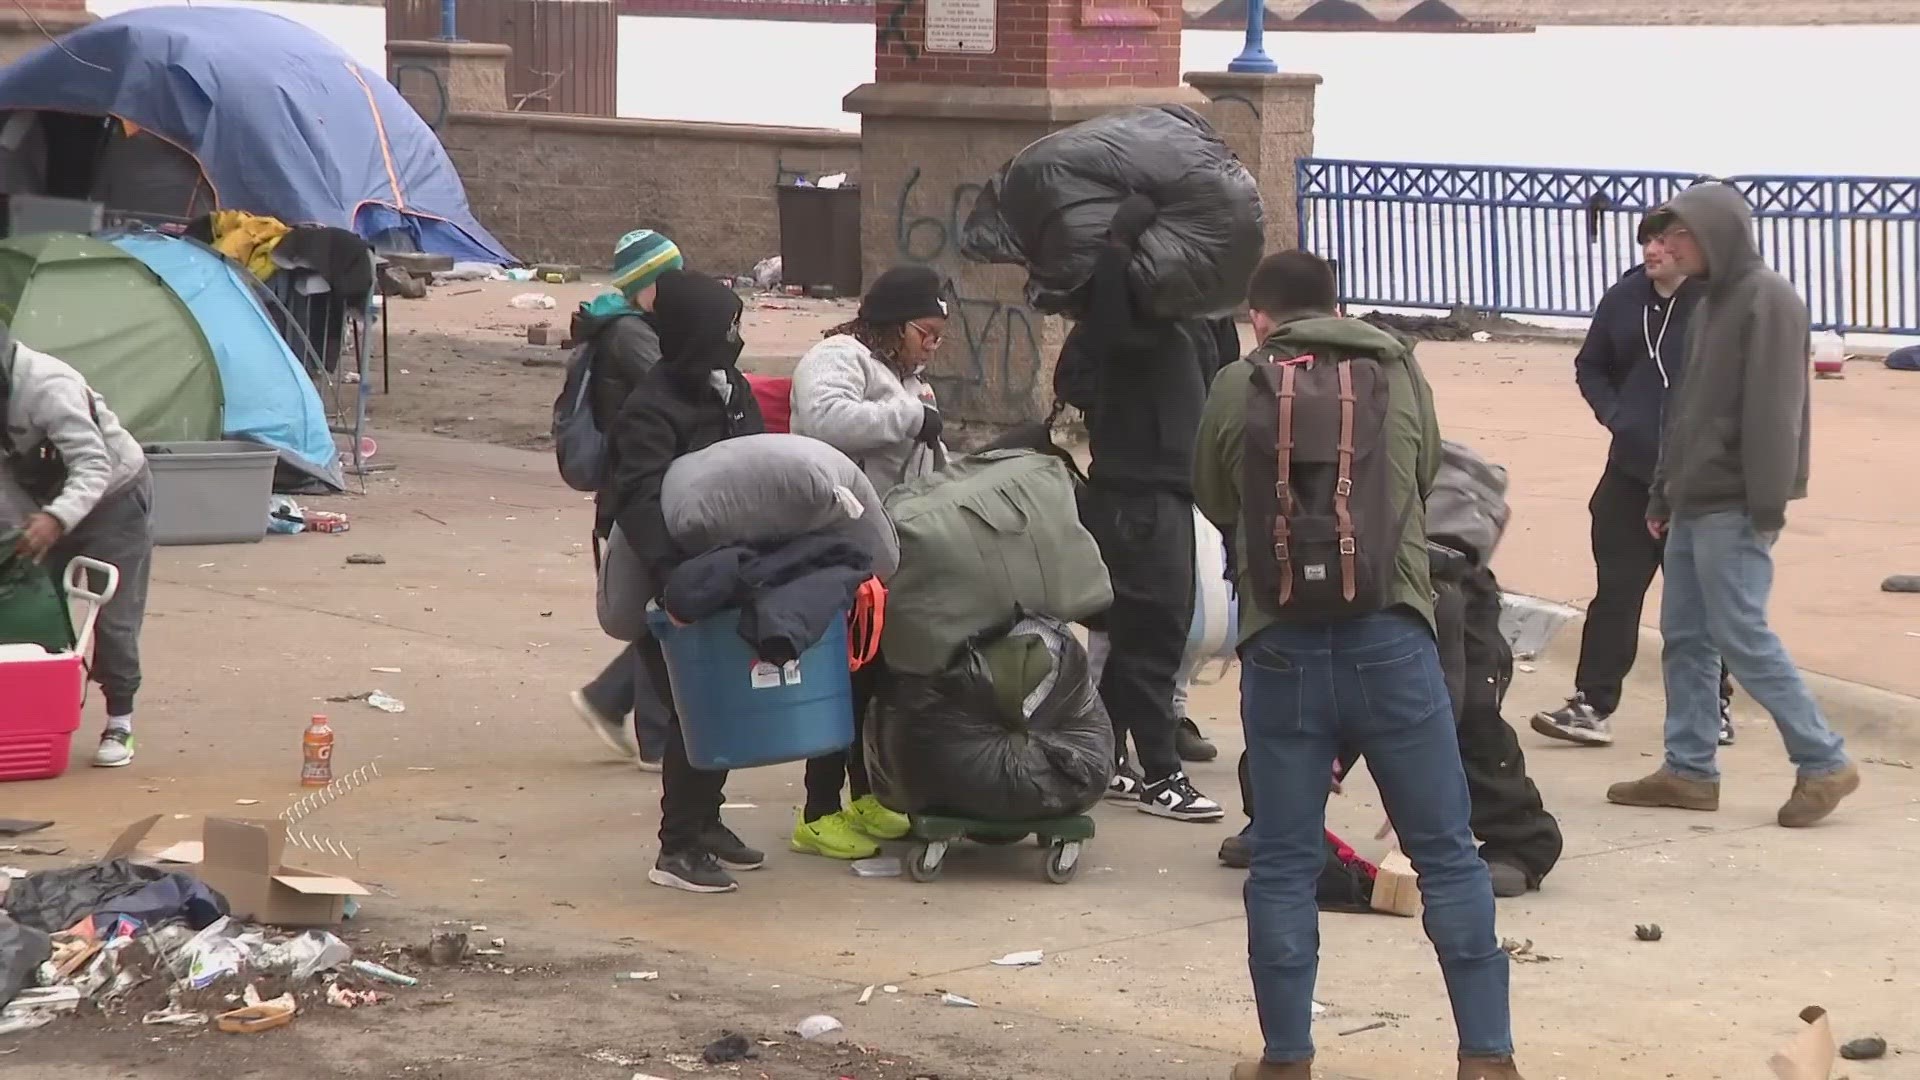 St. Louis moved forward with shutting down a homeless encampment near Laclede's Landing on Friday. Some accepted the city's offer of housing and resources.